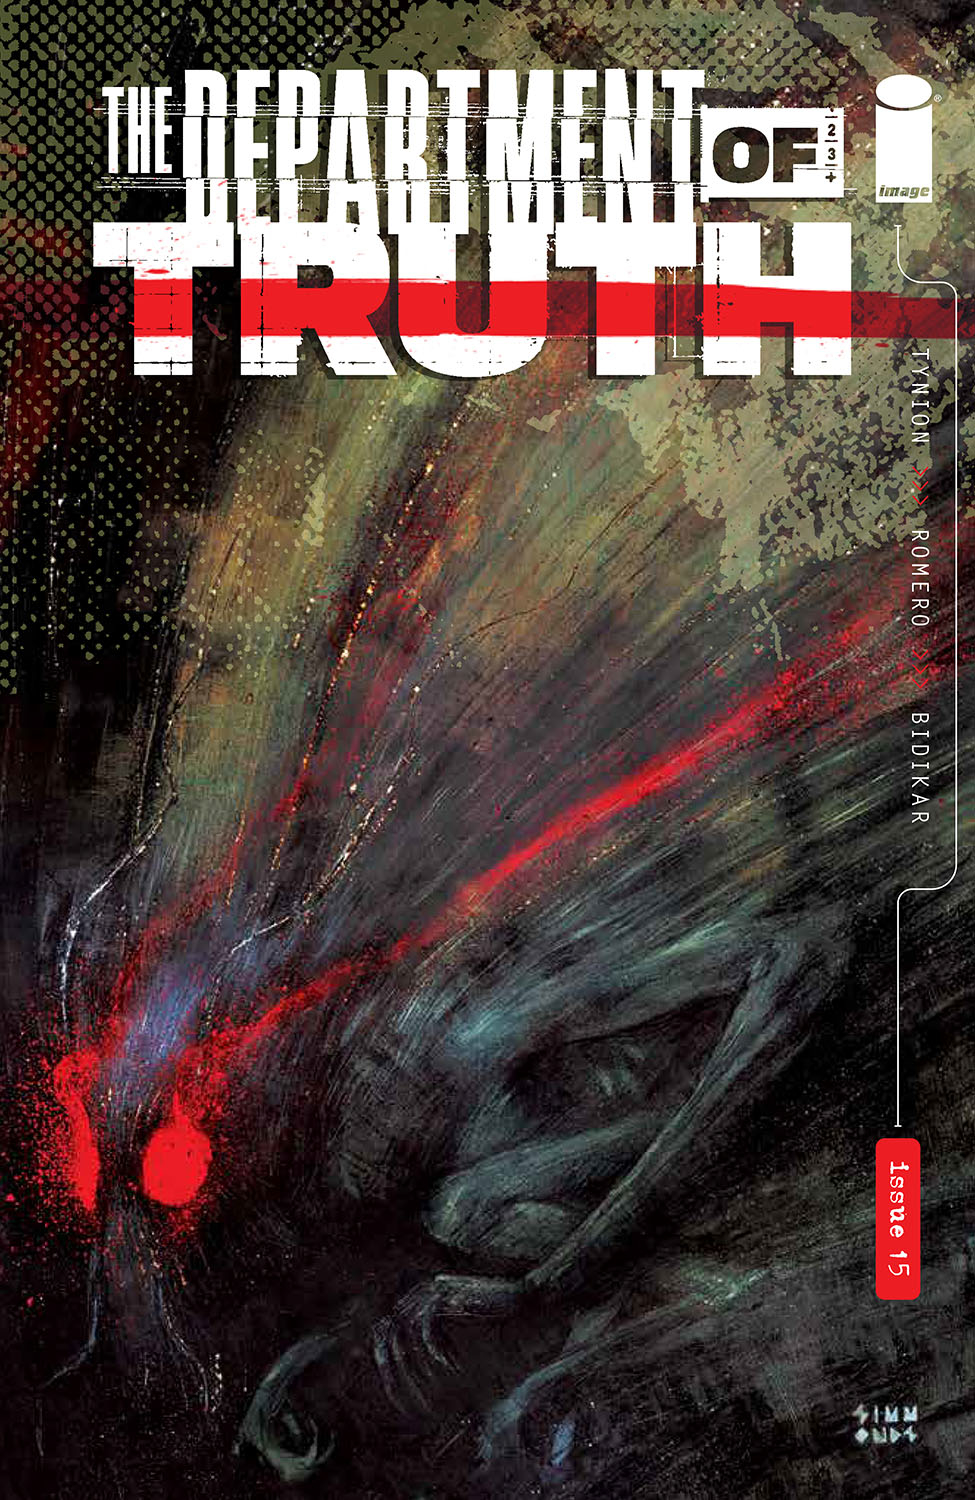 Department of Truth #15 Cover A Simmonds (Mature)